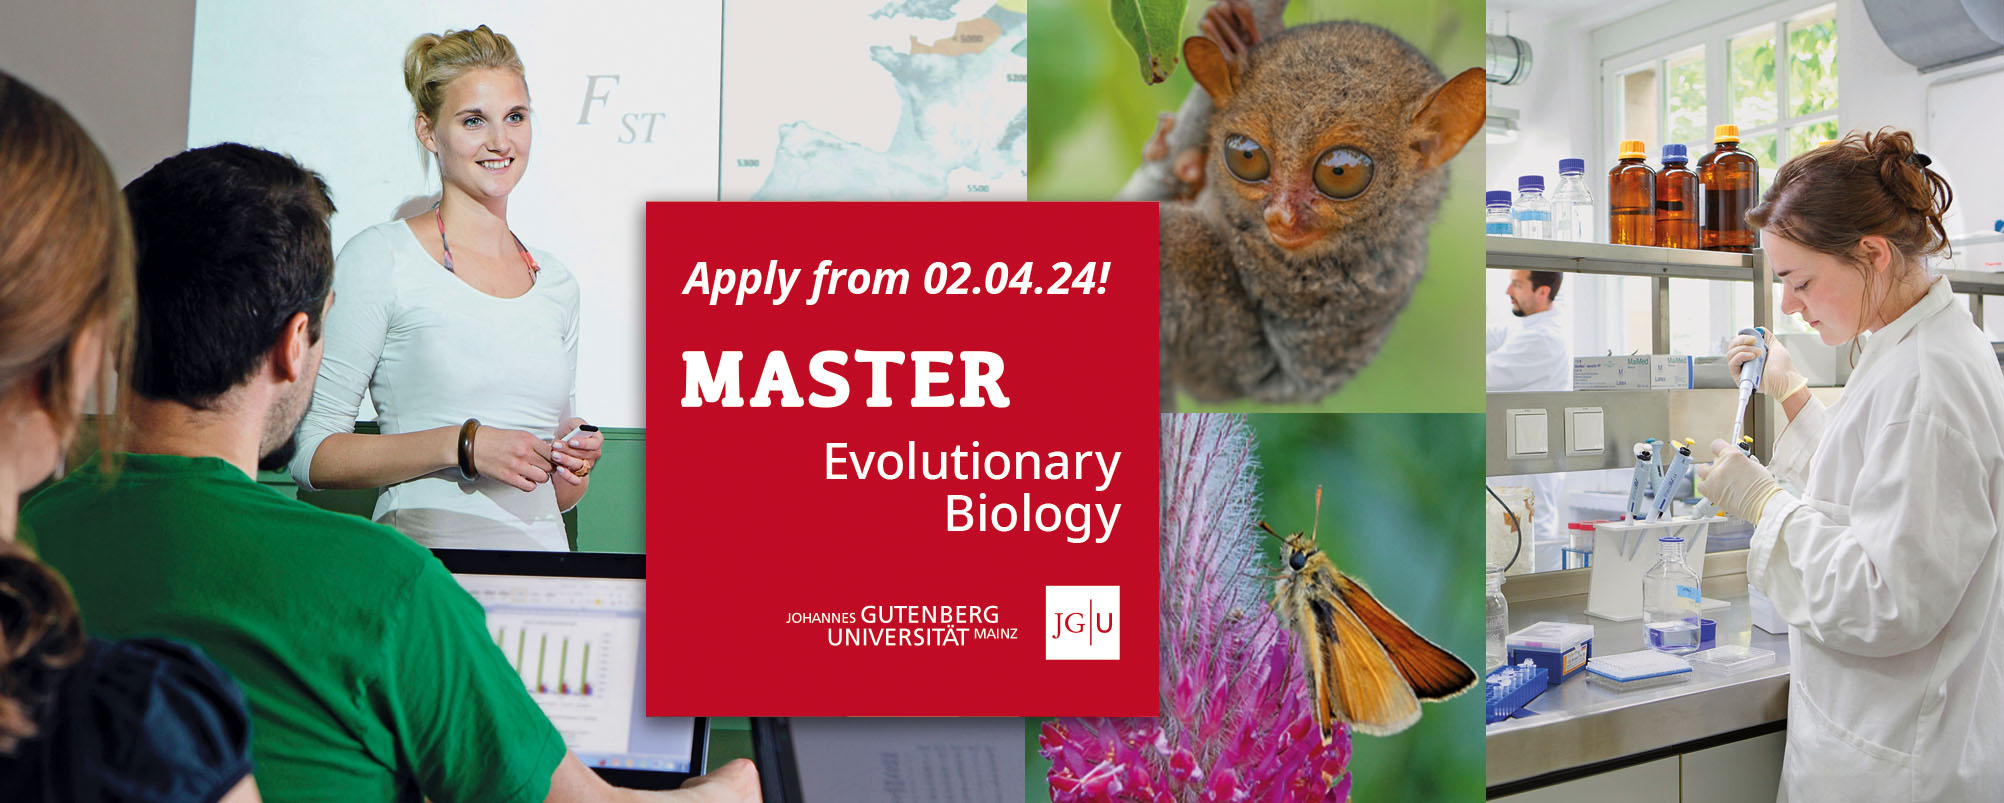 New international Master's degree program at the Faculty of Biology from winter term 2024/25. Photos: T. Hartmann (2), Adobe Stock, S. Xu